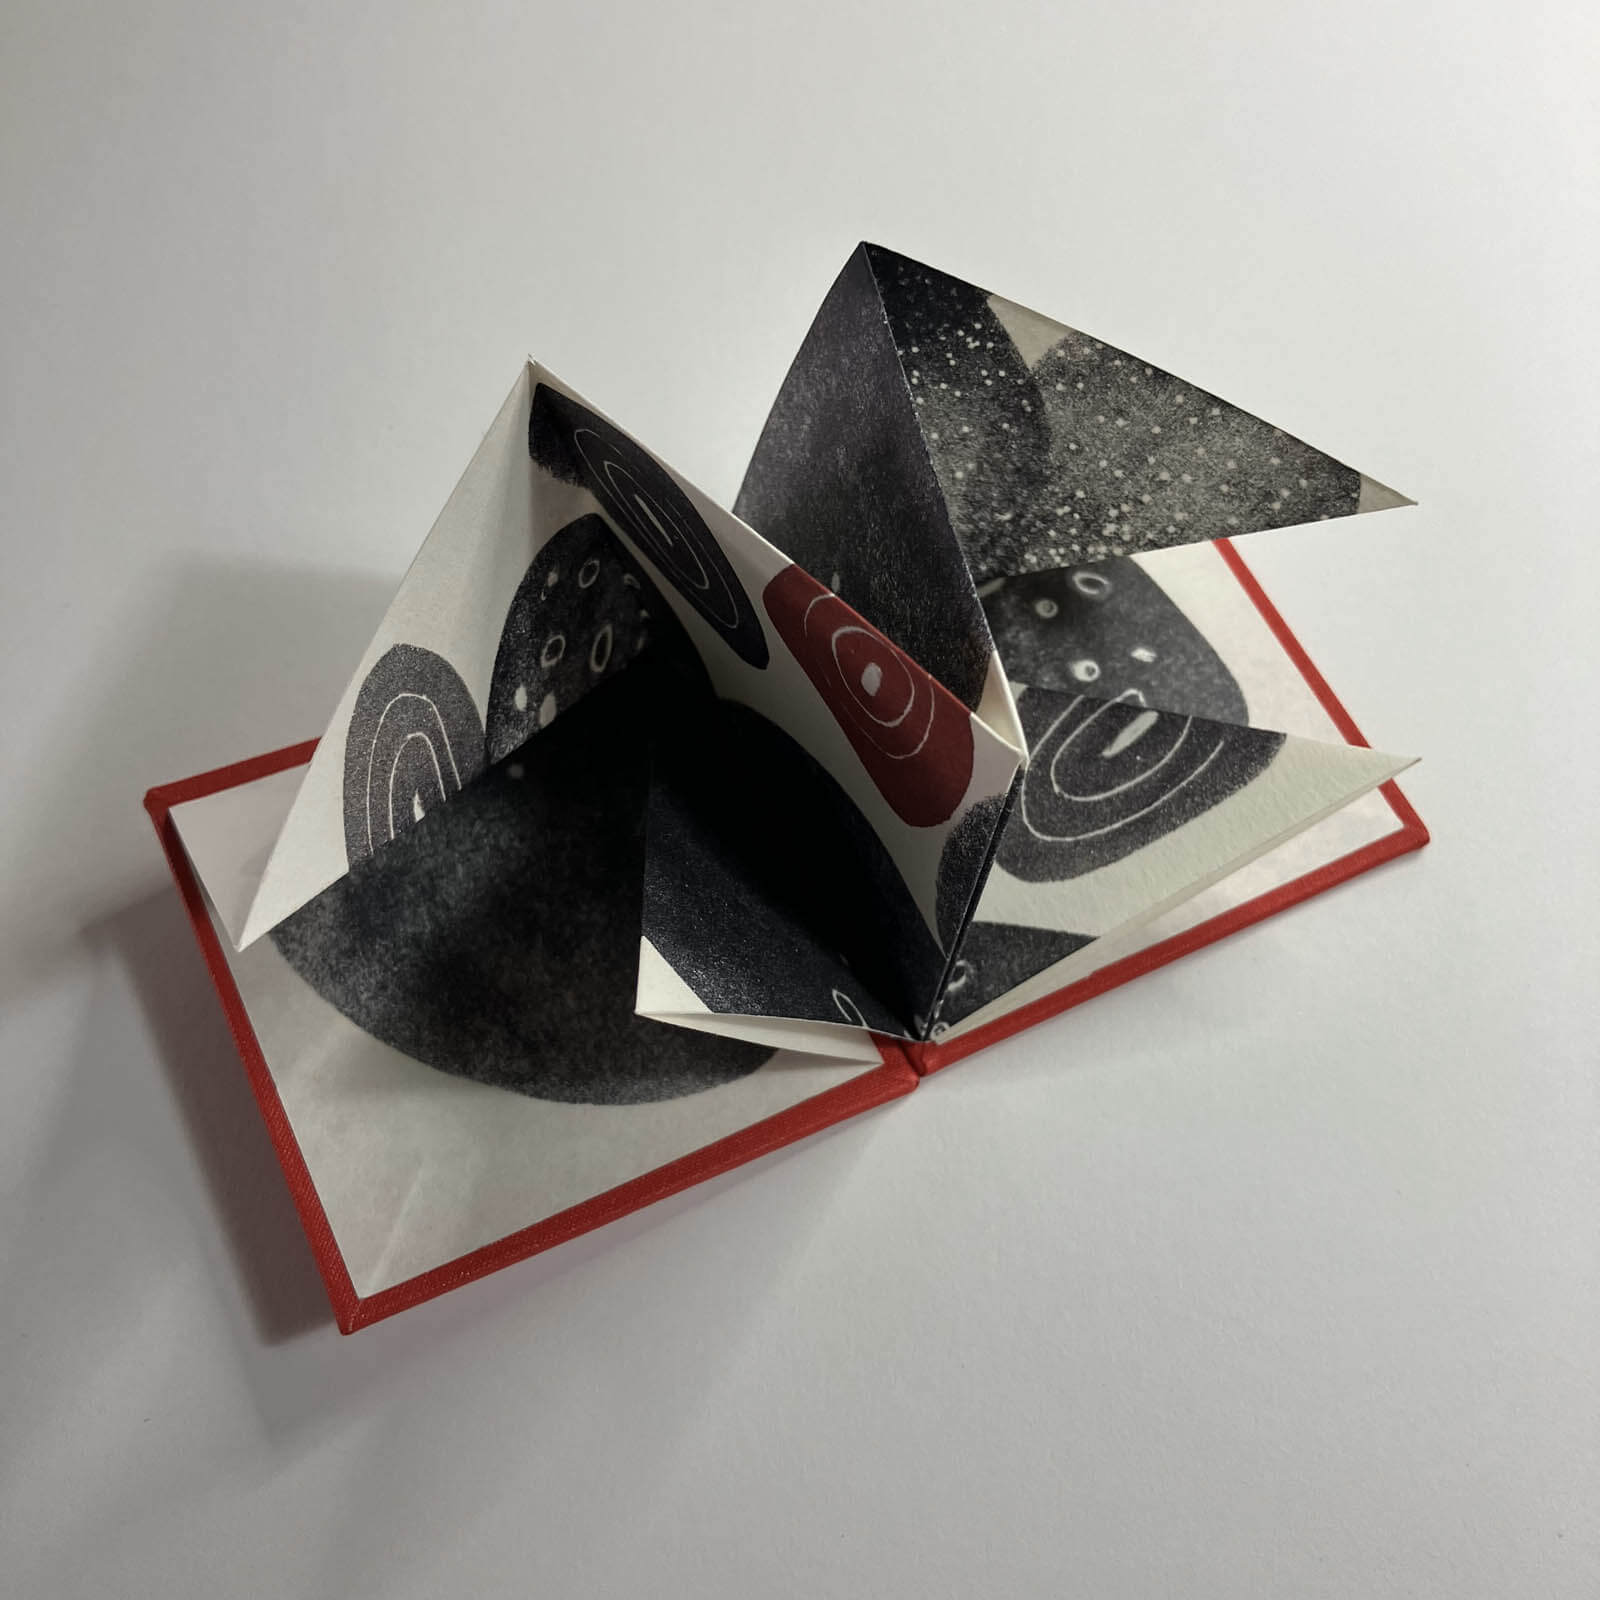 Book Arts 2 - by Isobel Lewis